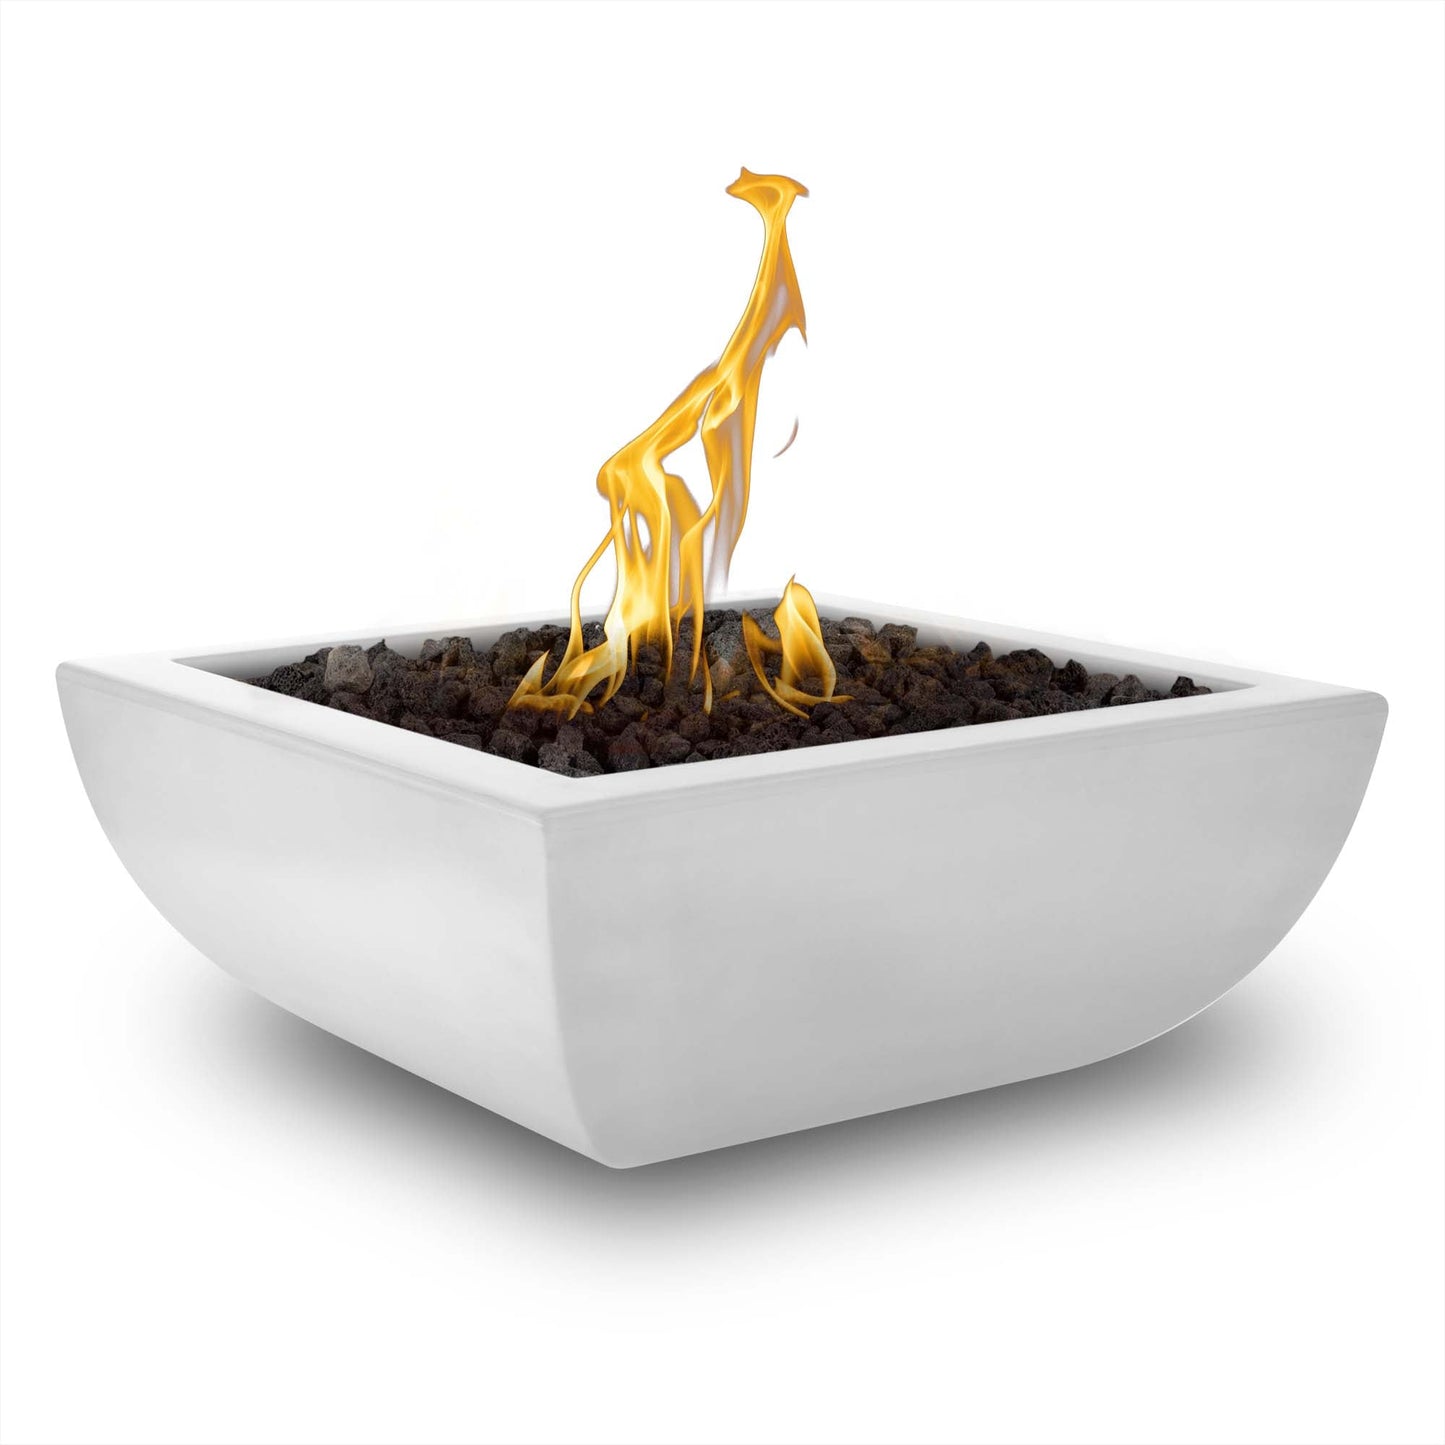 The Outdoor Plus Square Avalon 30" Rustic Coffee GFRC Concrete Natural Gas Fire Bowl with Match Lit with Flame Sense Ignition